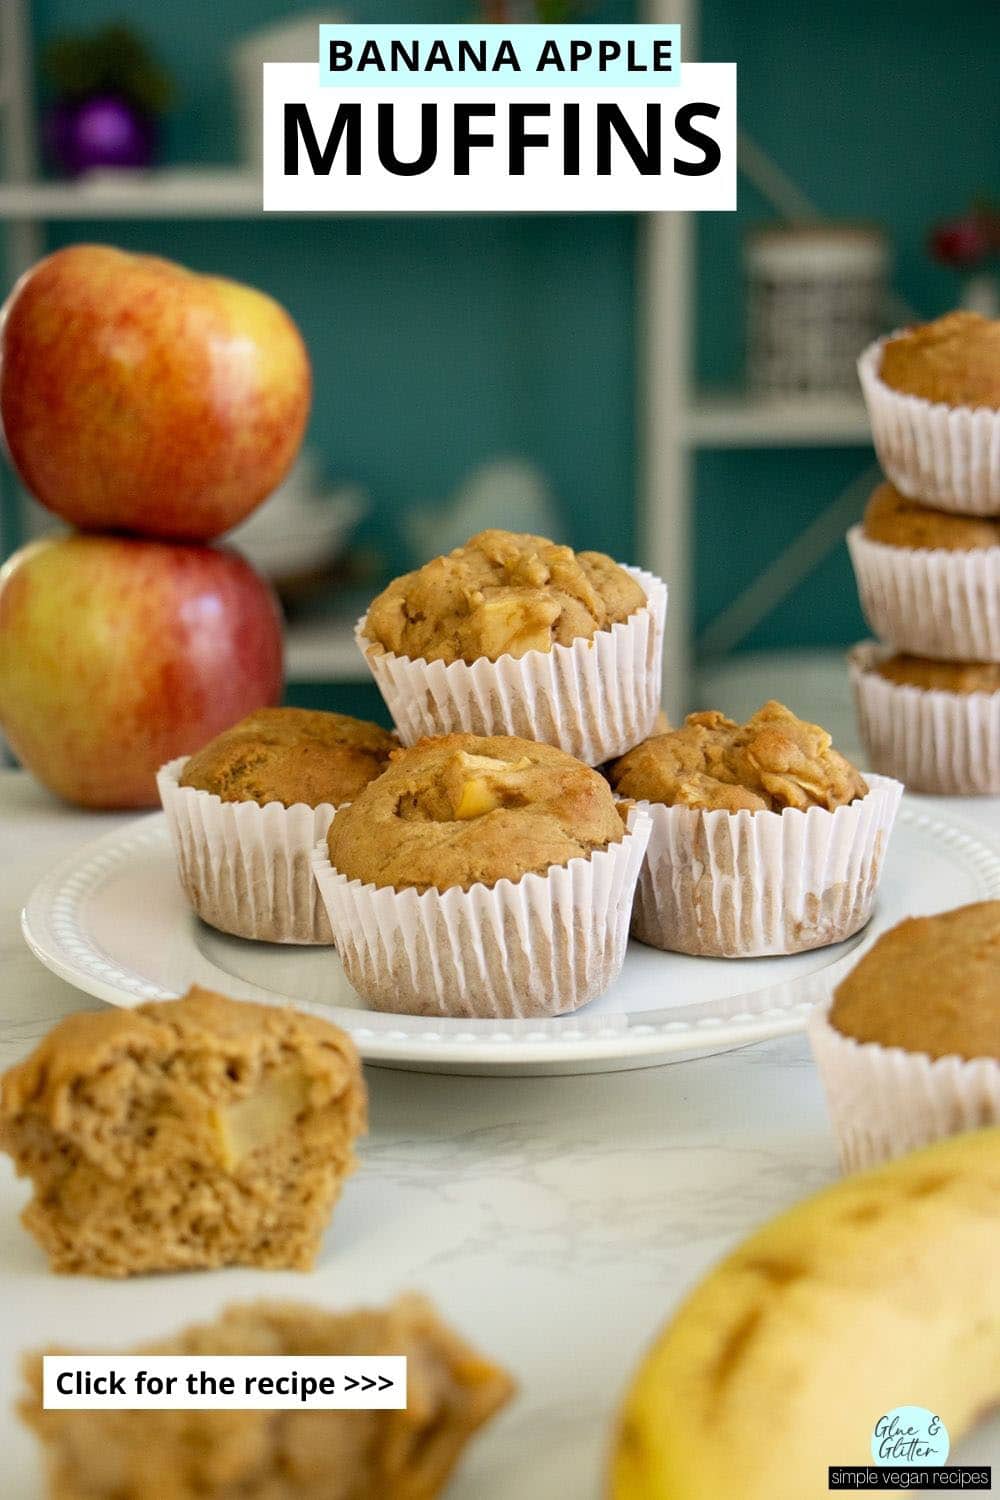 banana apple muffins on a white plate surrounded by apples, banana, and a muffin broken in half, so you can see the texture inside, text overlay